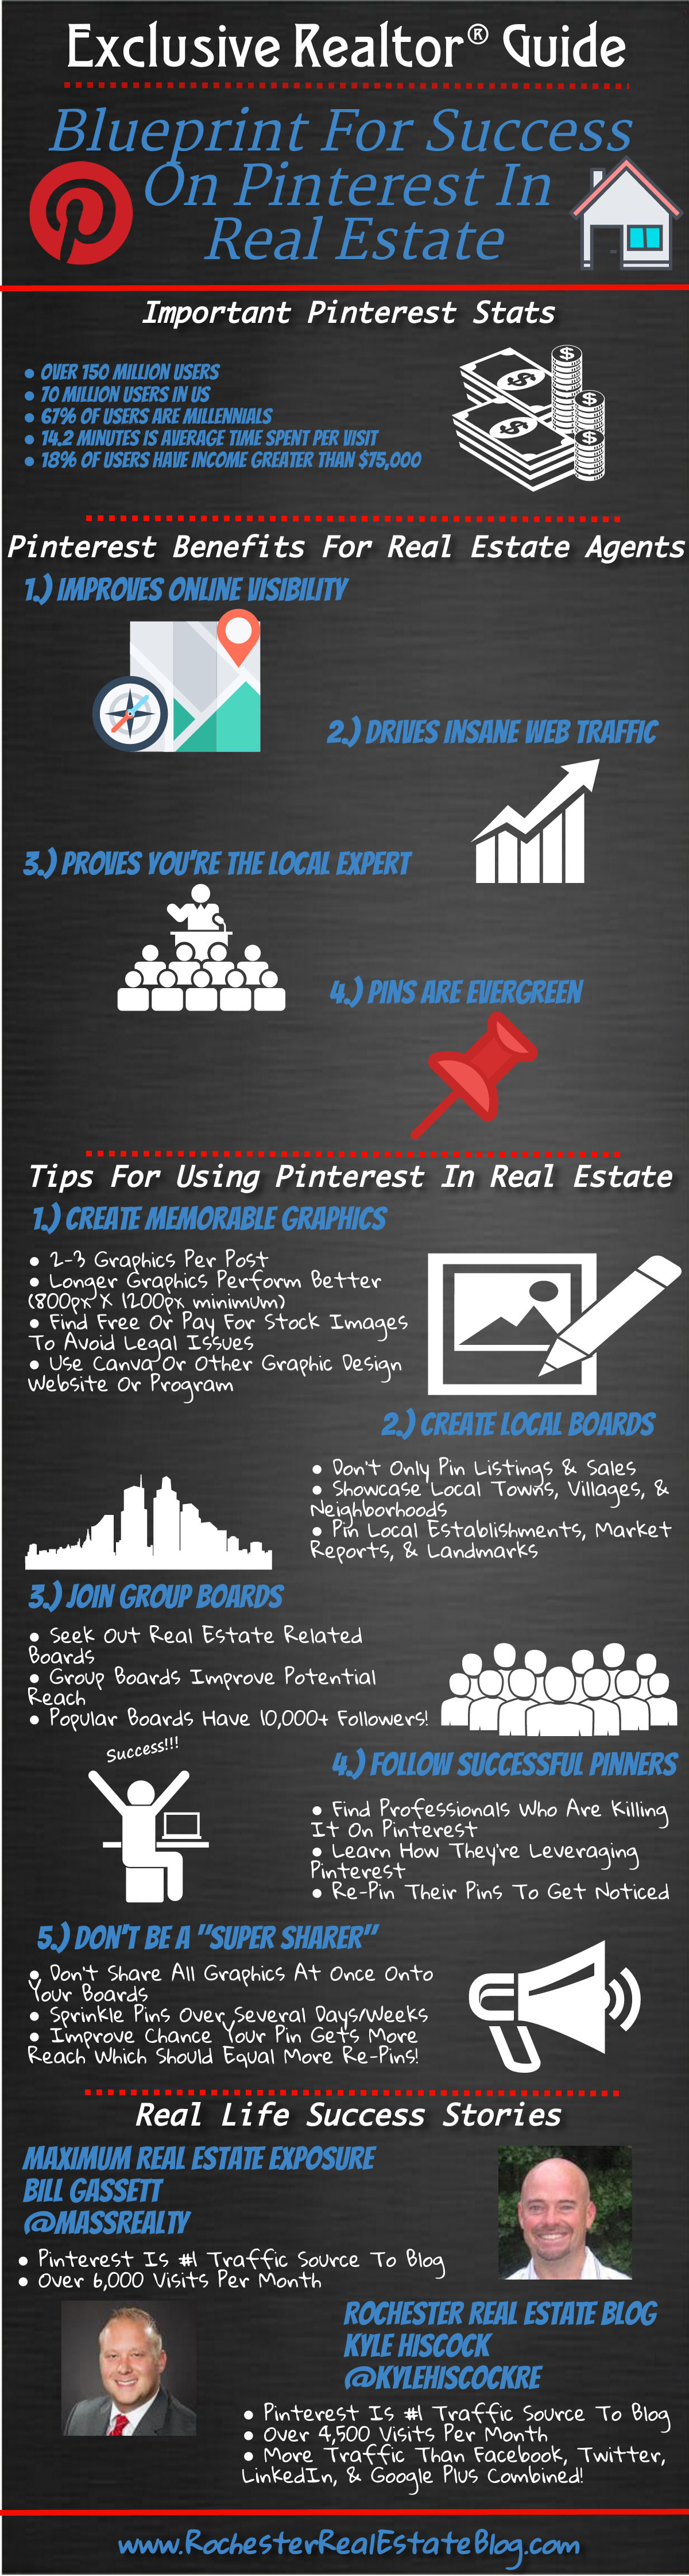 Exclusive Realtor Guide For Crushing It On Pinterest In Real Estate - Infographic